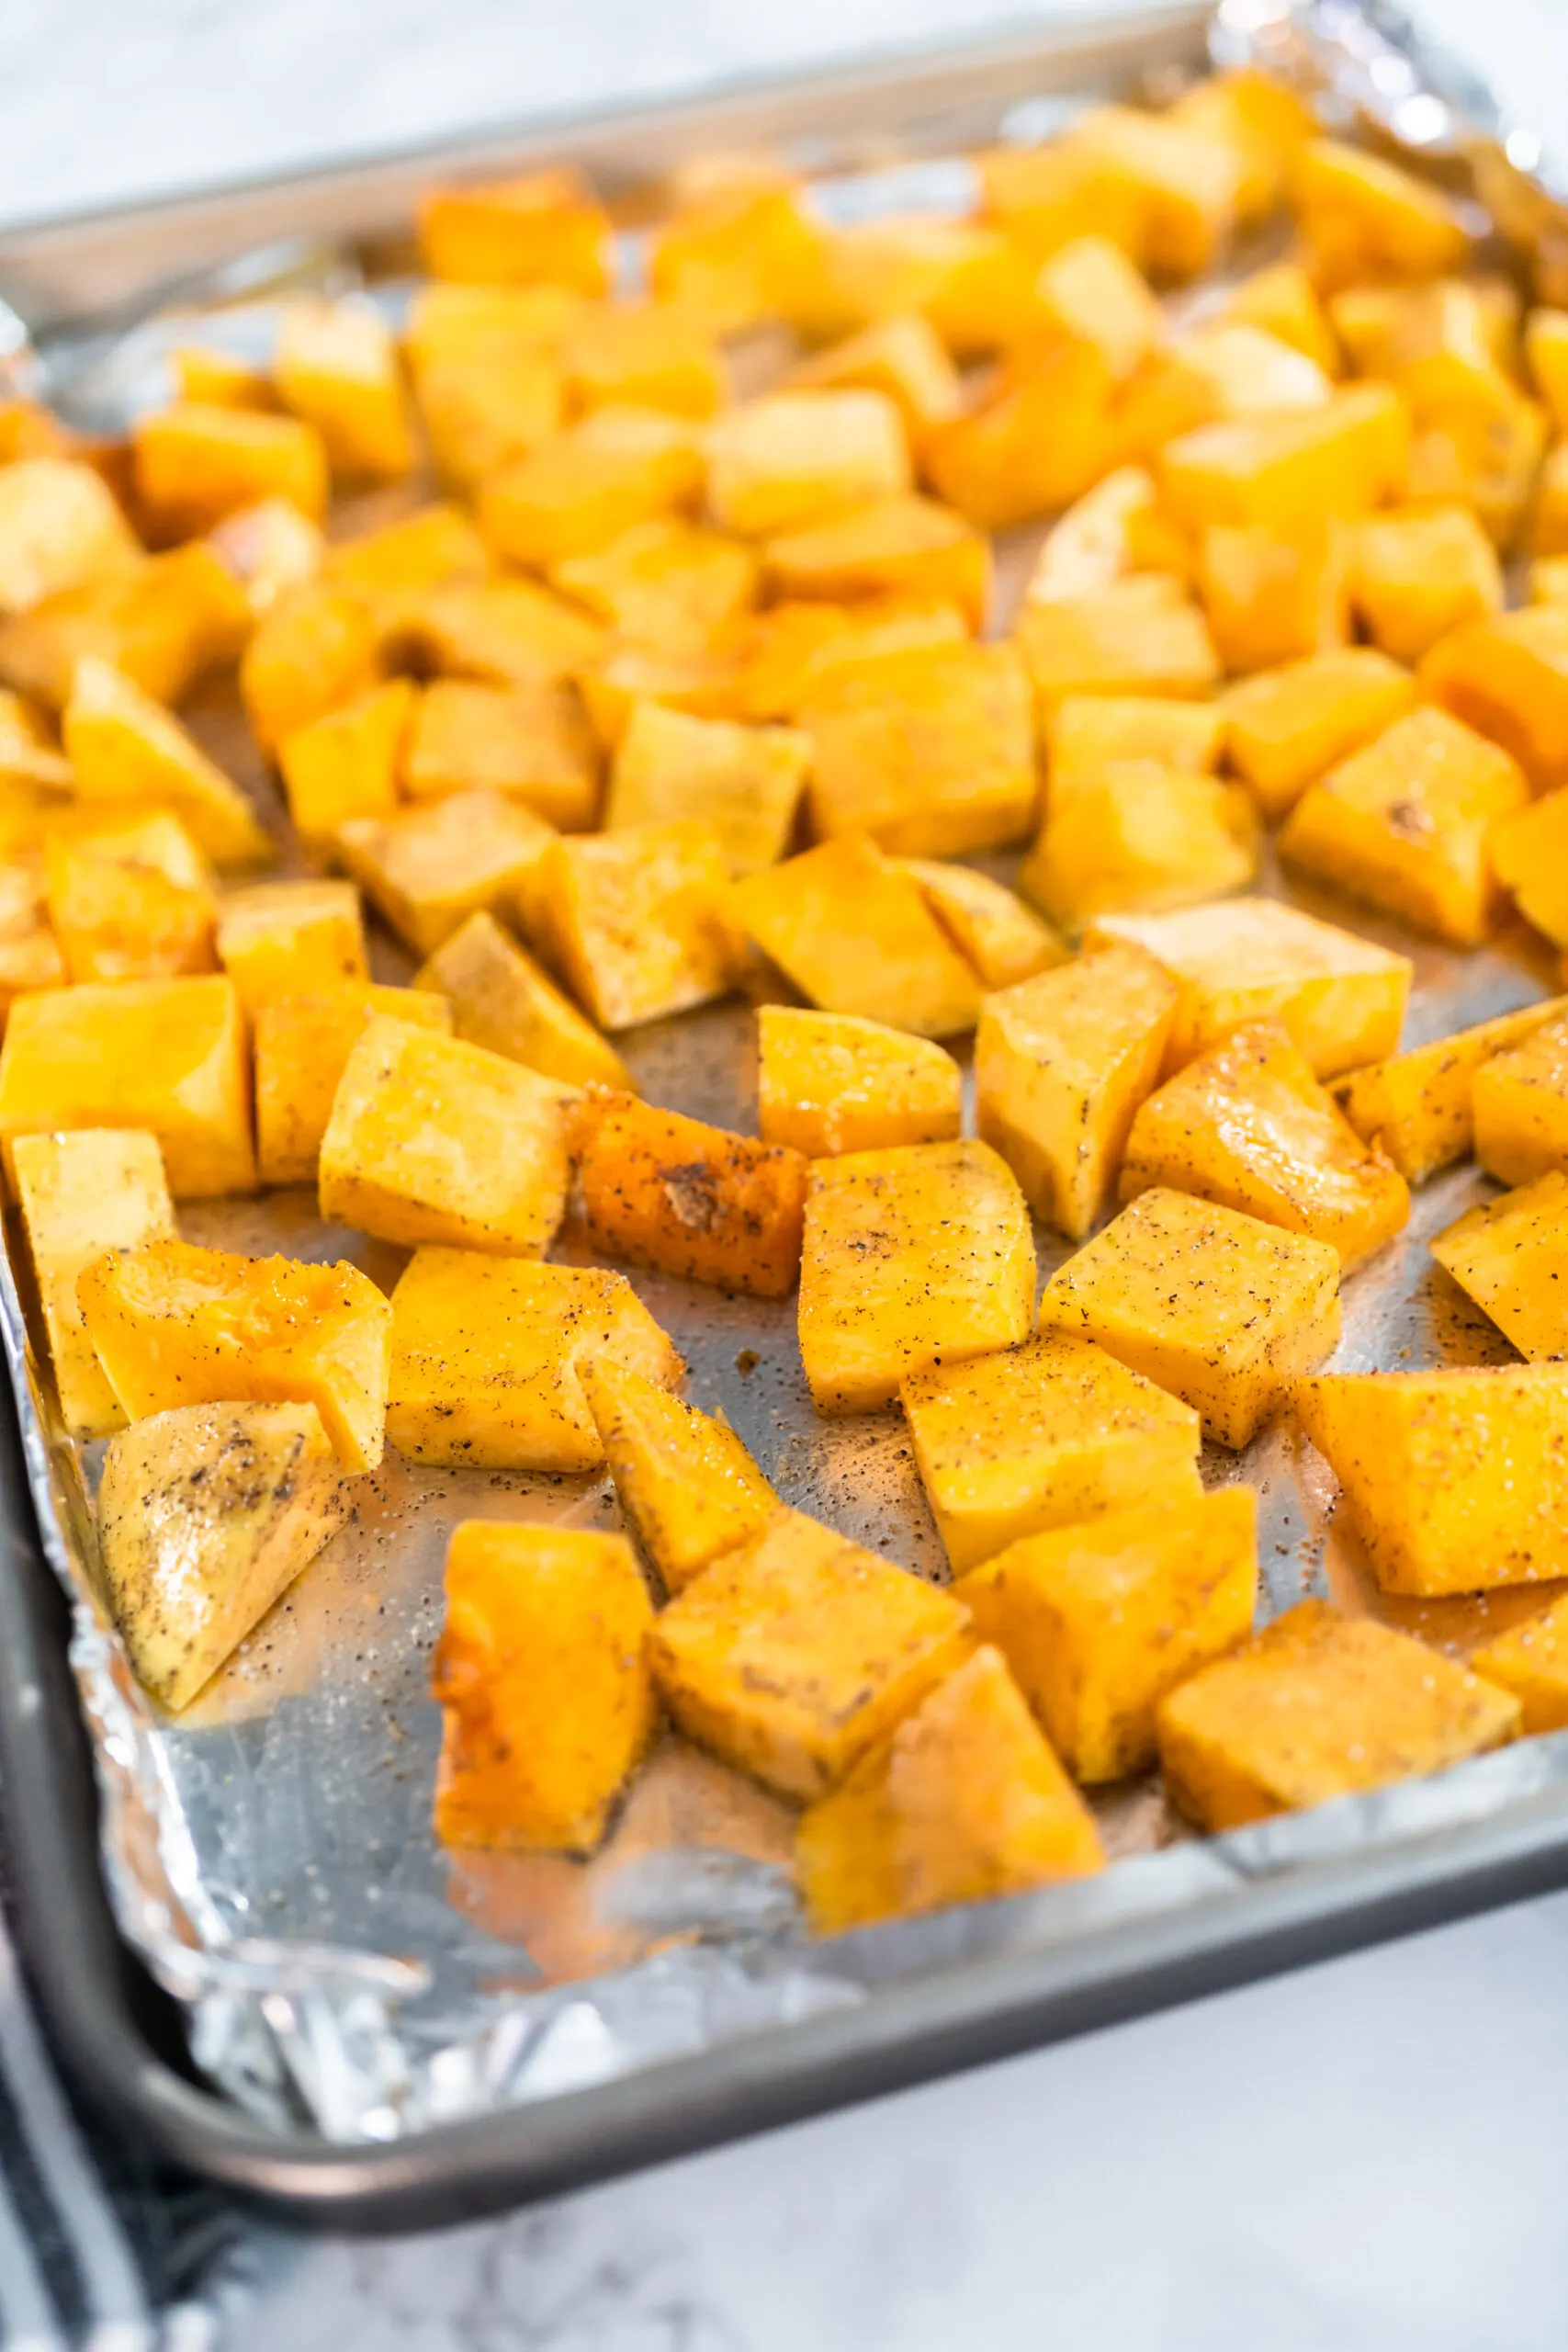 How Long To Cook Butternut Squash In The Oven